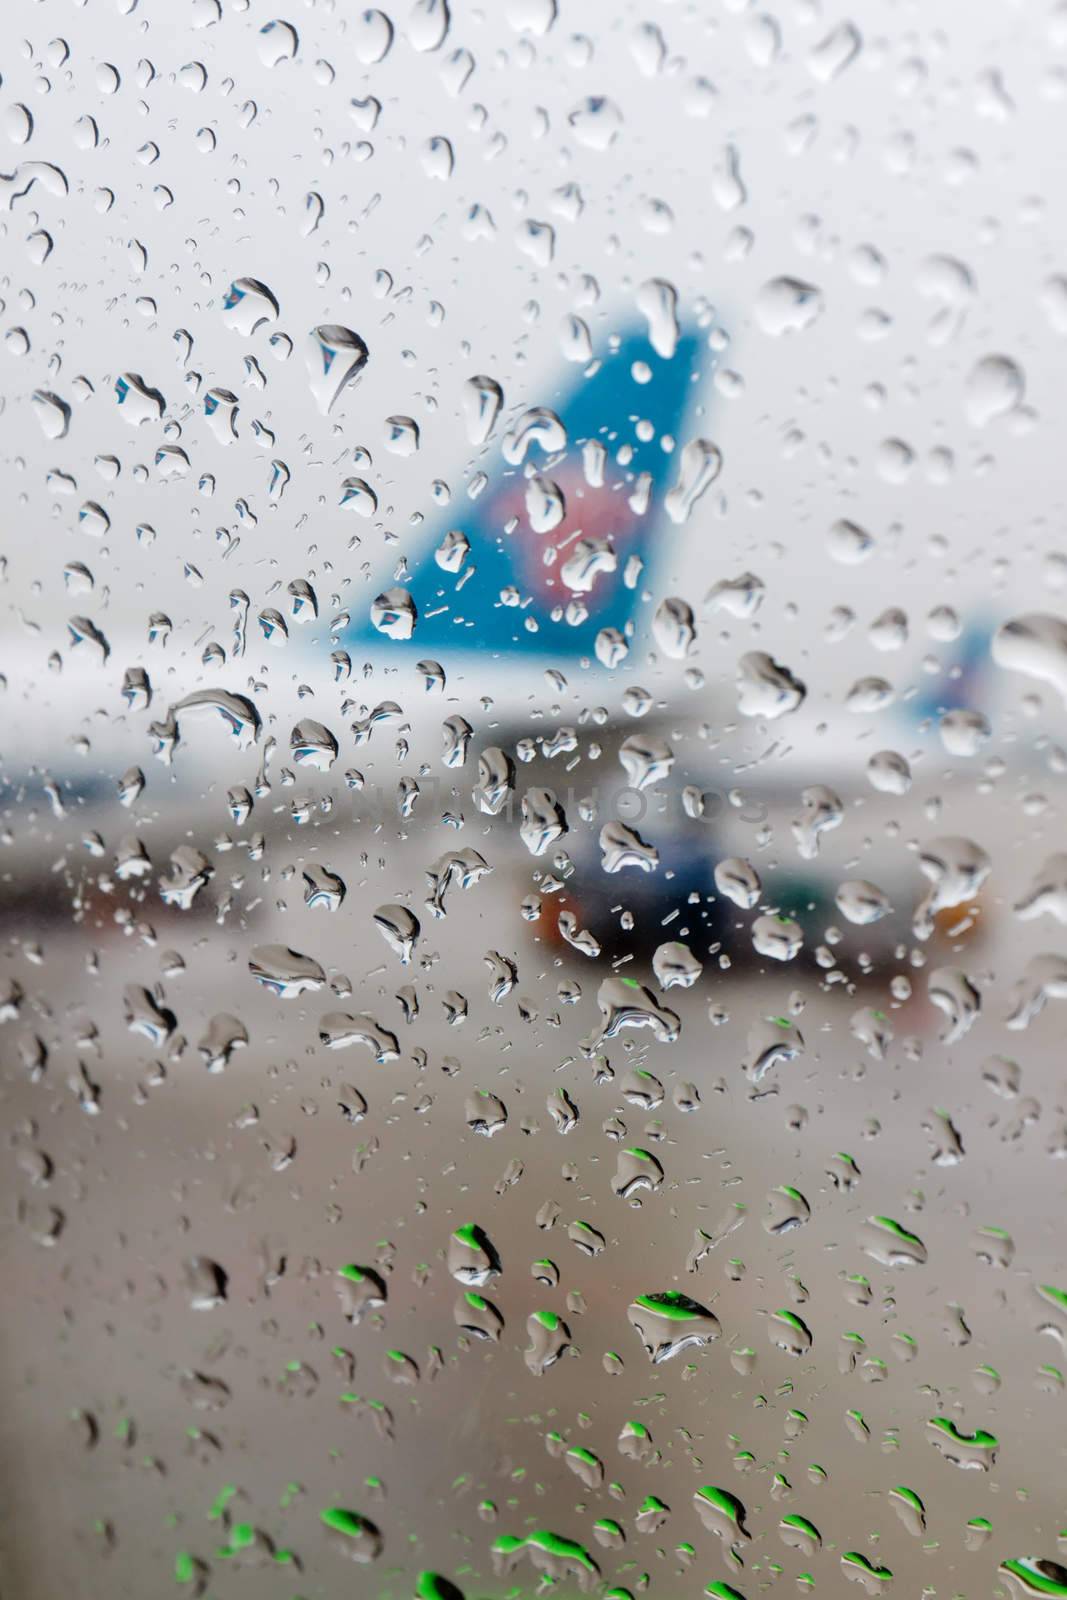 Water drops on an aircraft window by dsmsoft